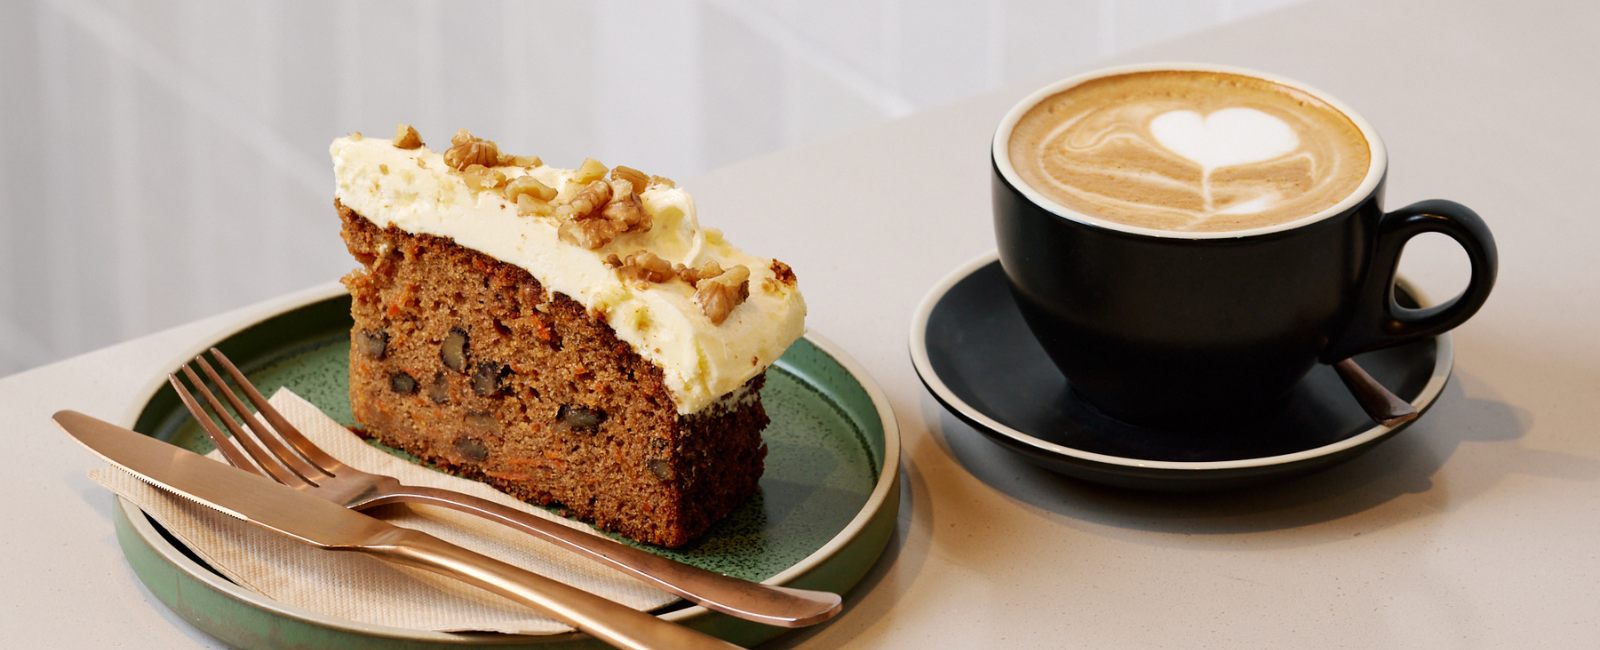 Carrot cake and coffee at Bound